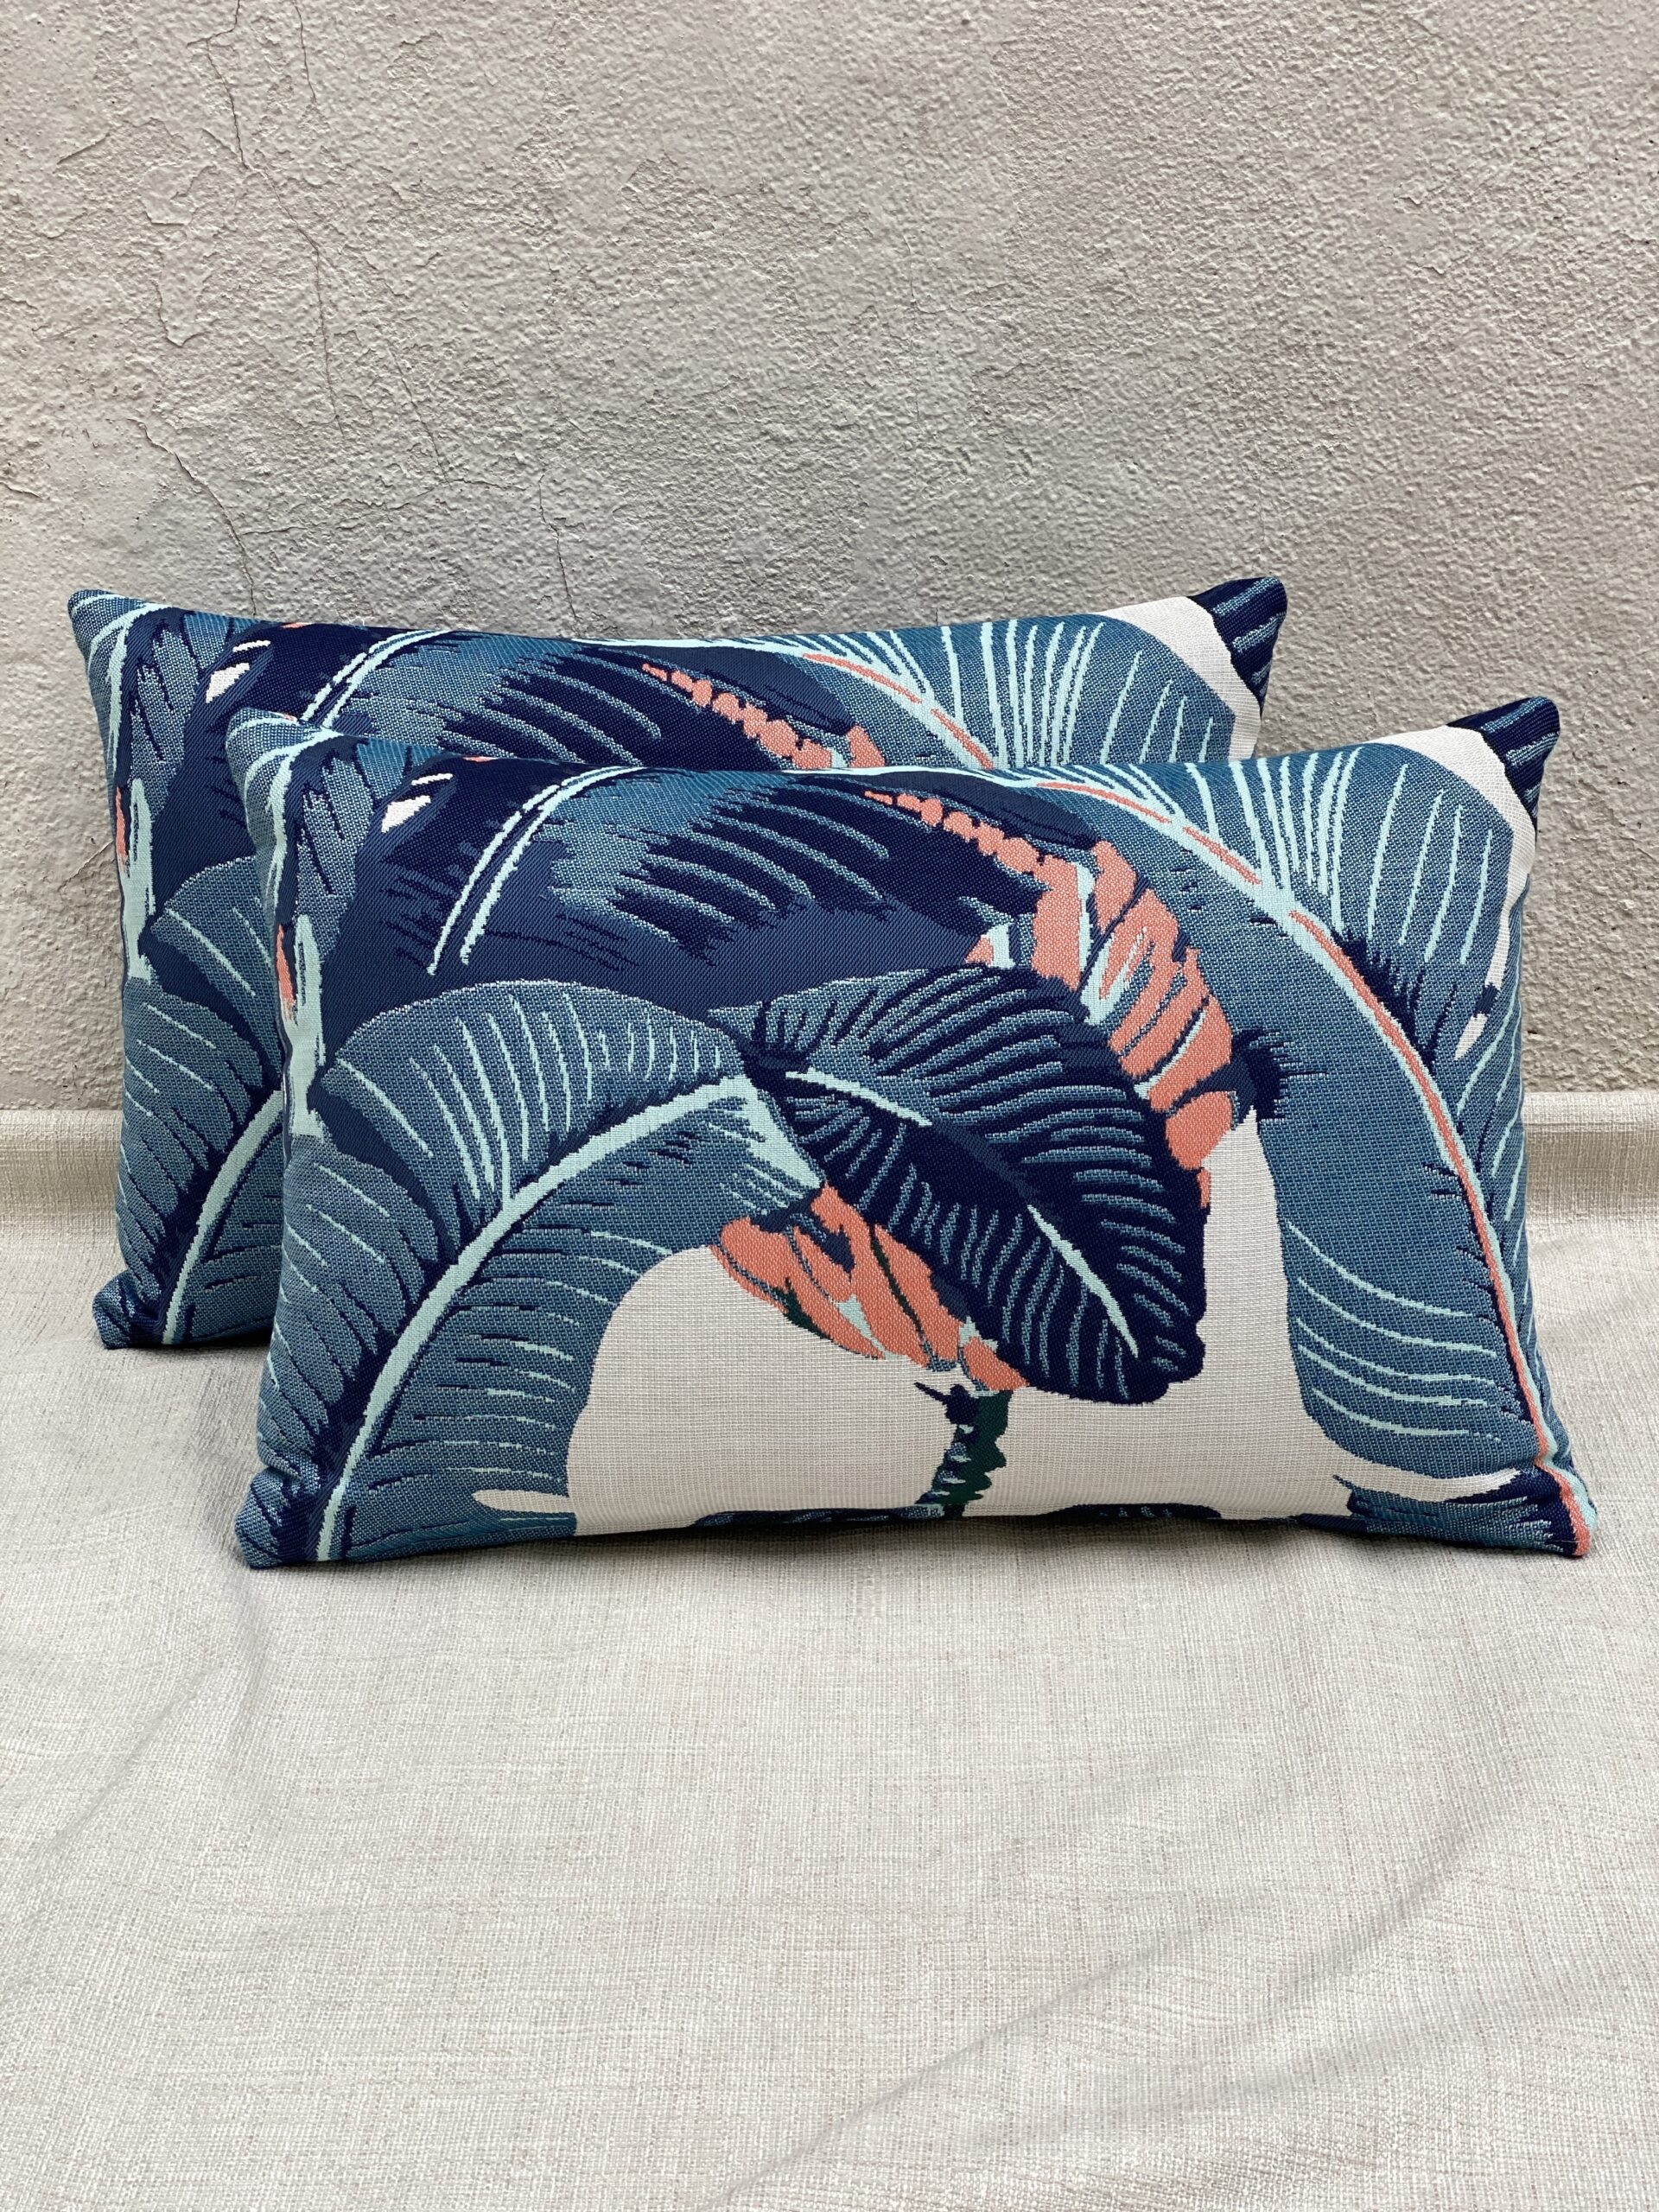 CW Stockwell Martinique Pillows